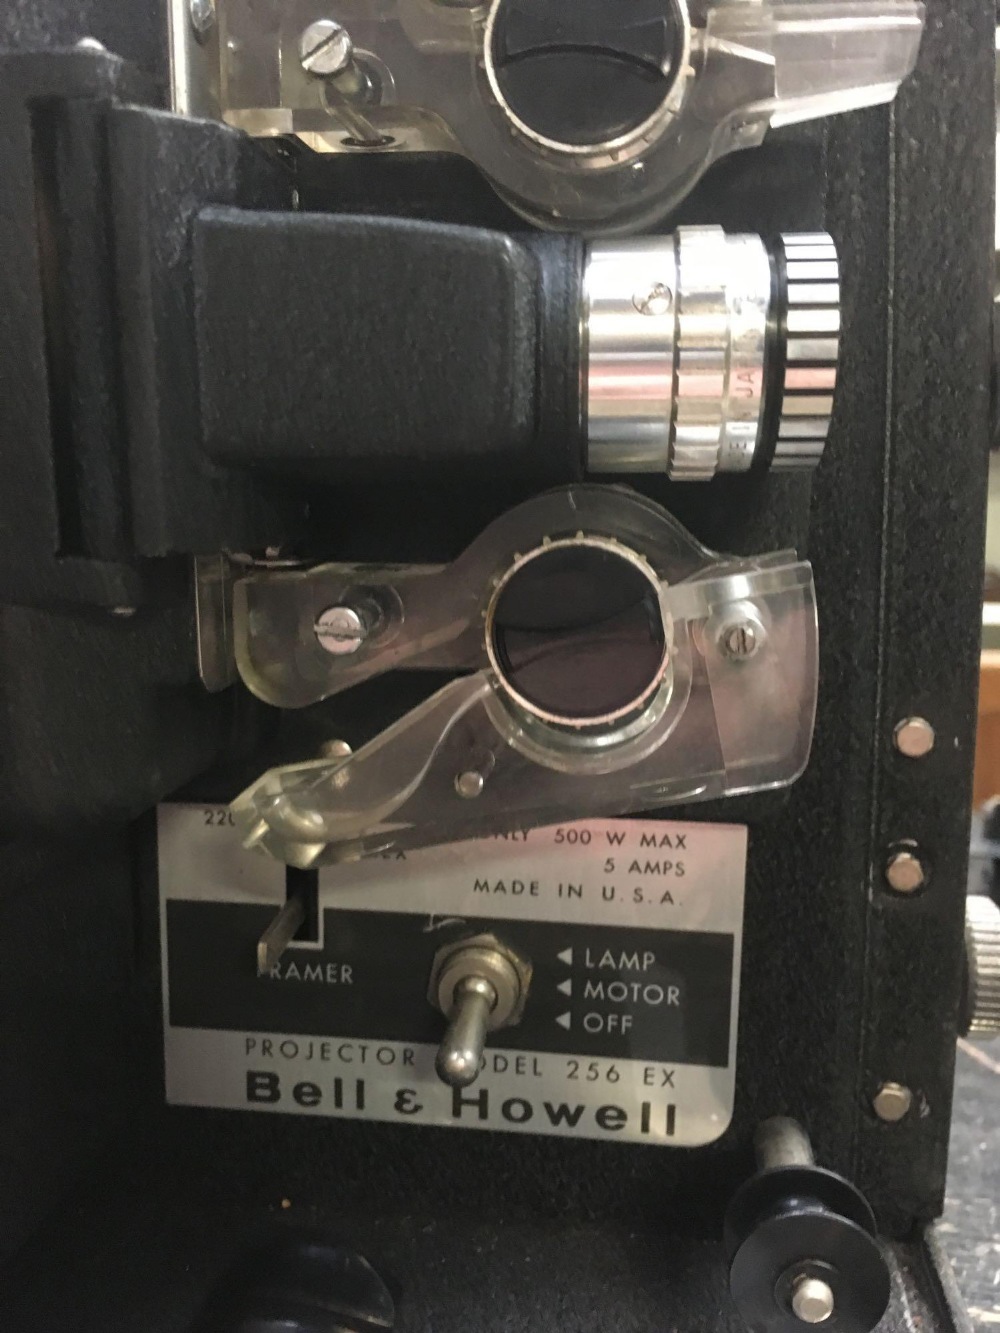 BELL & HOWELL PROJECTOR WITH AUTO LOAD - Image 3 of 4